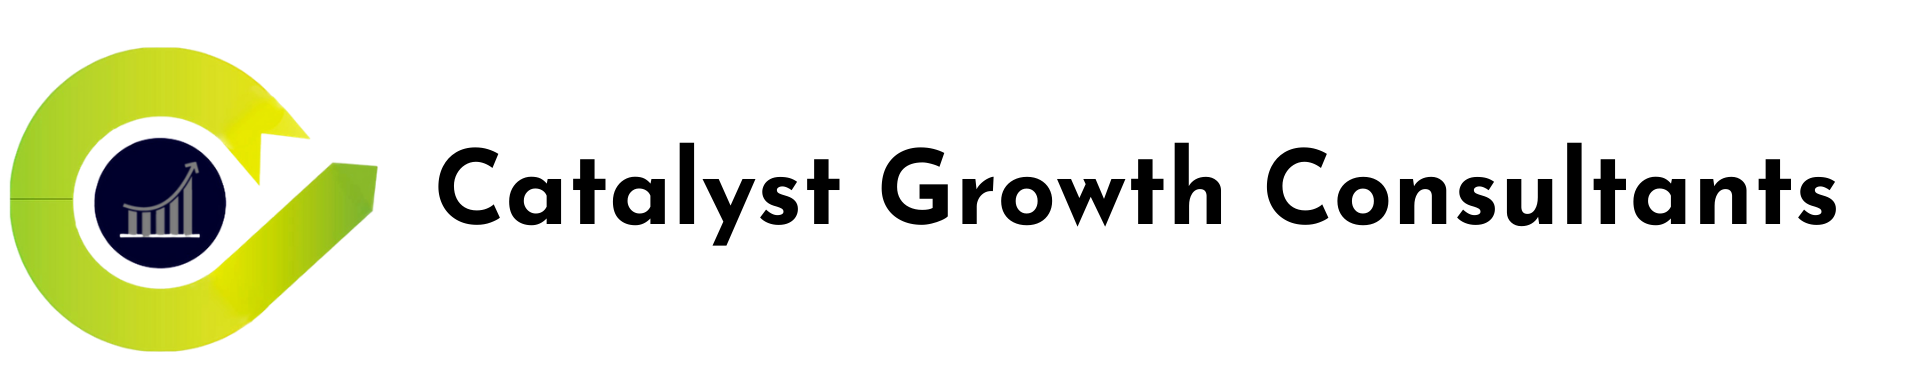 Catalyst Growth Consultants